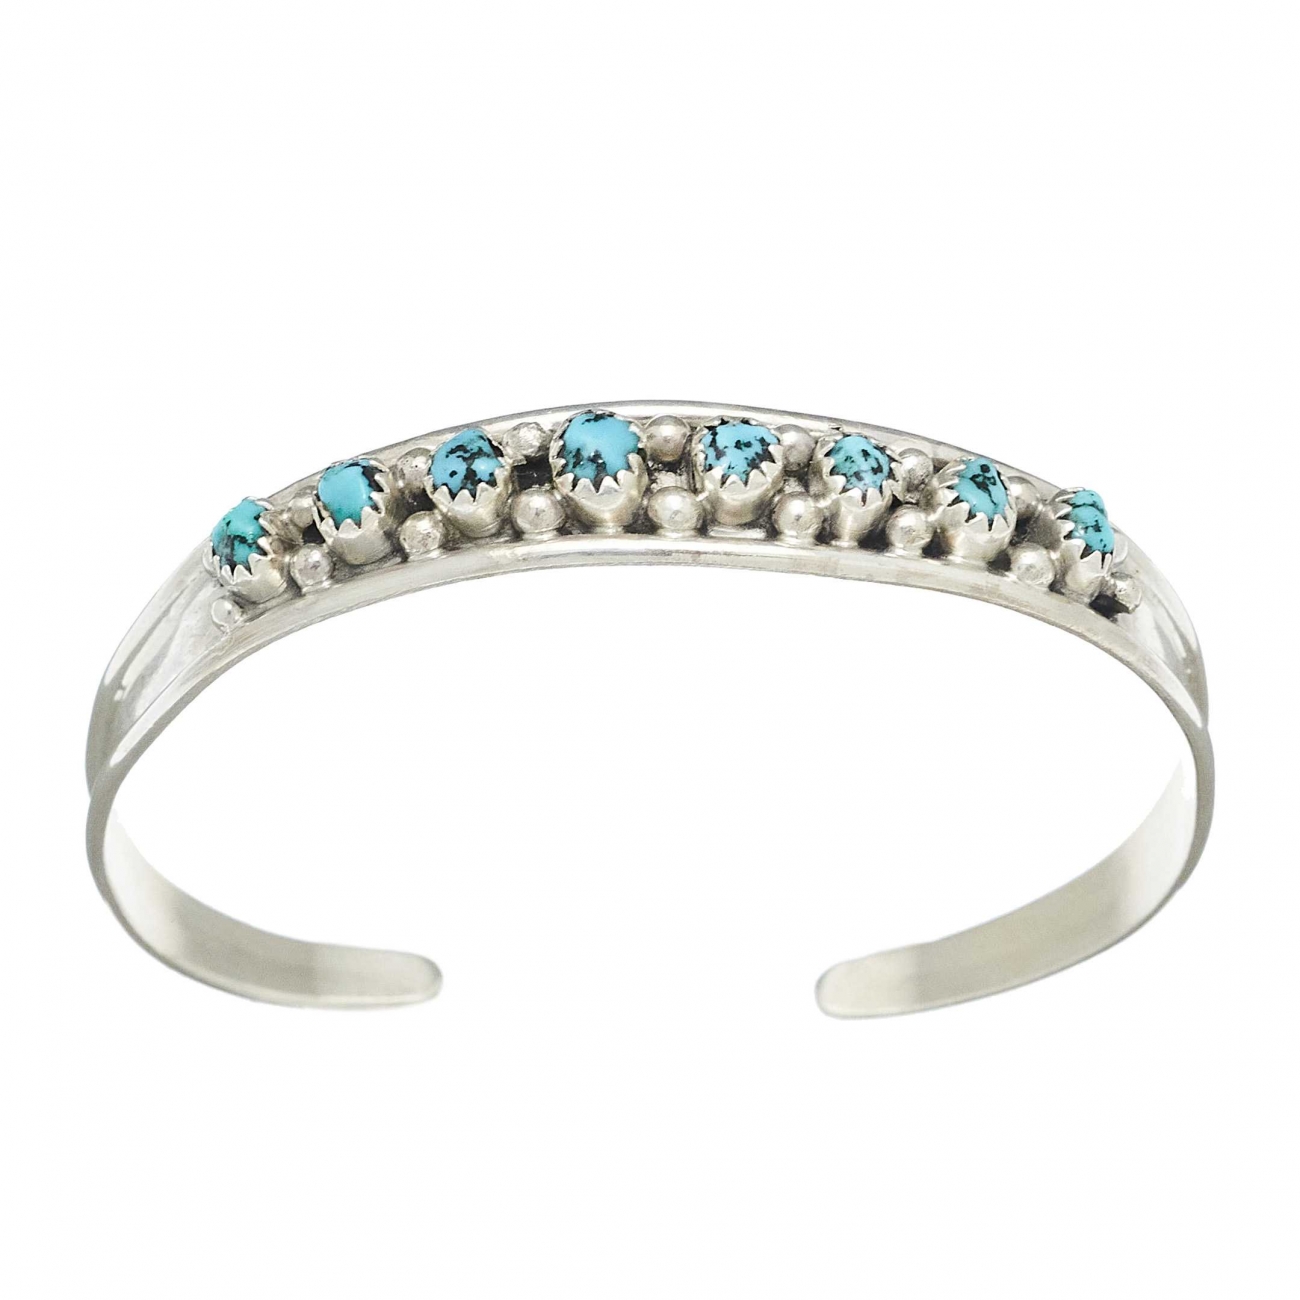 Navajo bracelet BRw117 for women in turquoise and silver - Harpo Paris